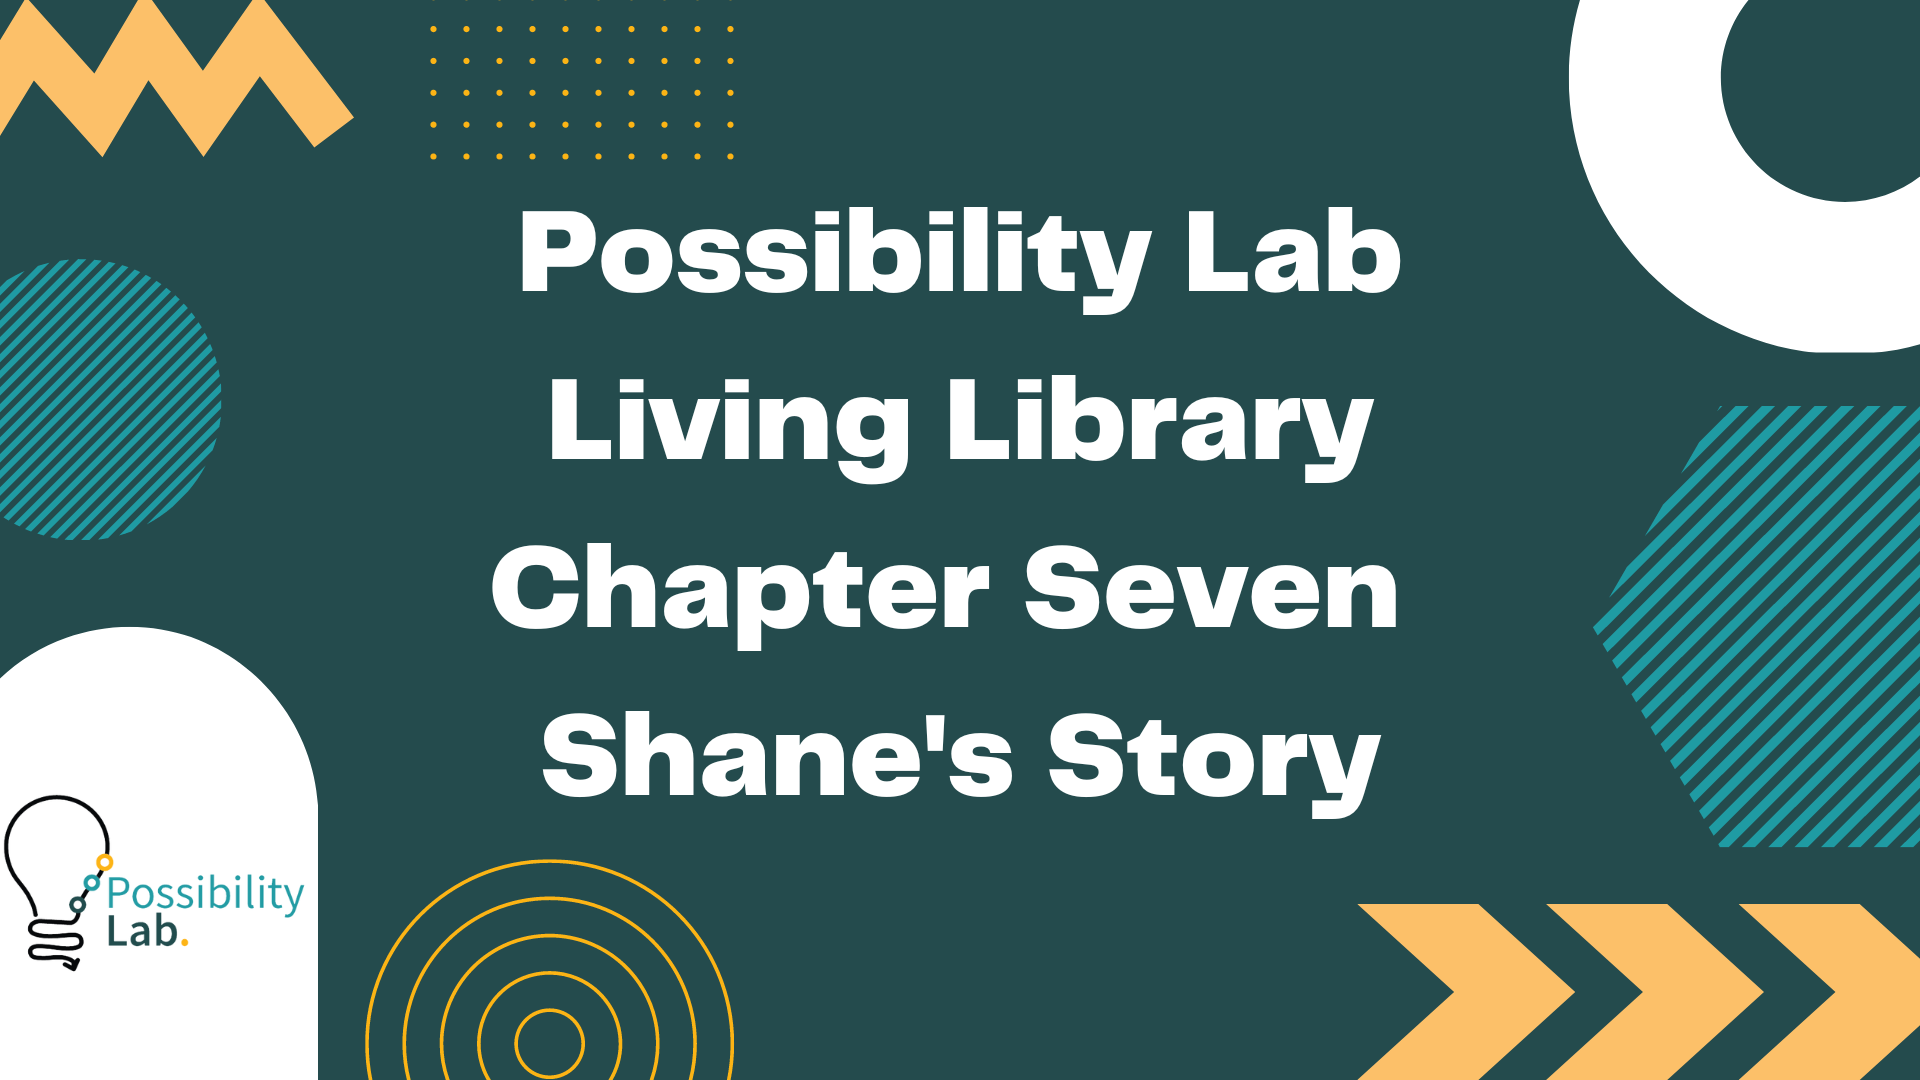 A slide from our living library videos. It has a green background and squiggle designs in white, lighter green and orange. The possibility lab logo is on the bottom left and text on the slide reads Possibility Lab Living Library Chapter Seven Shane's Story